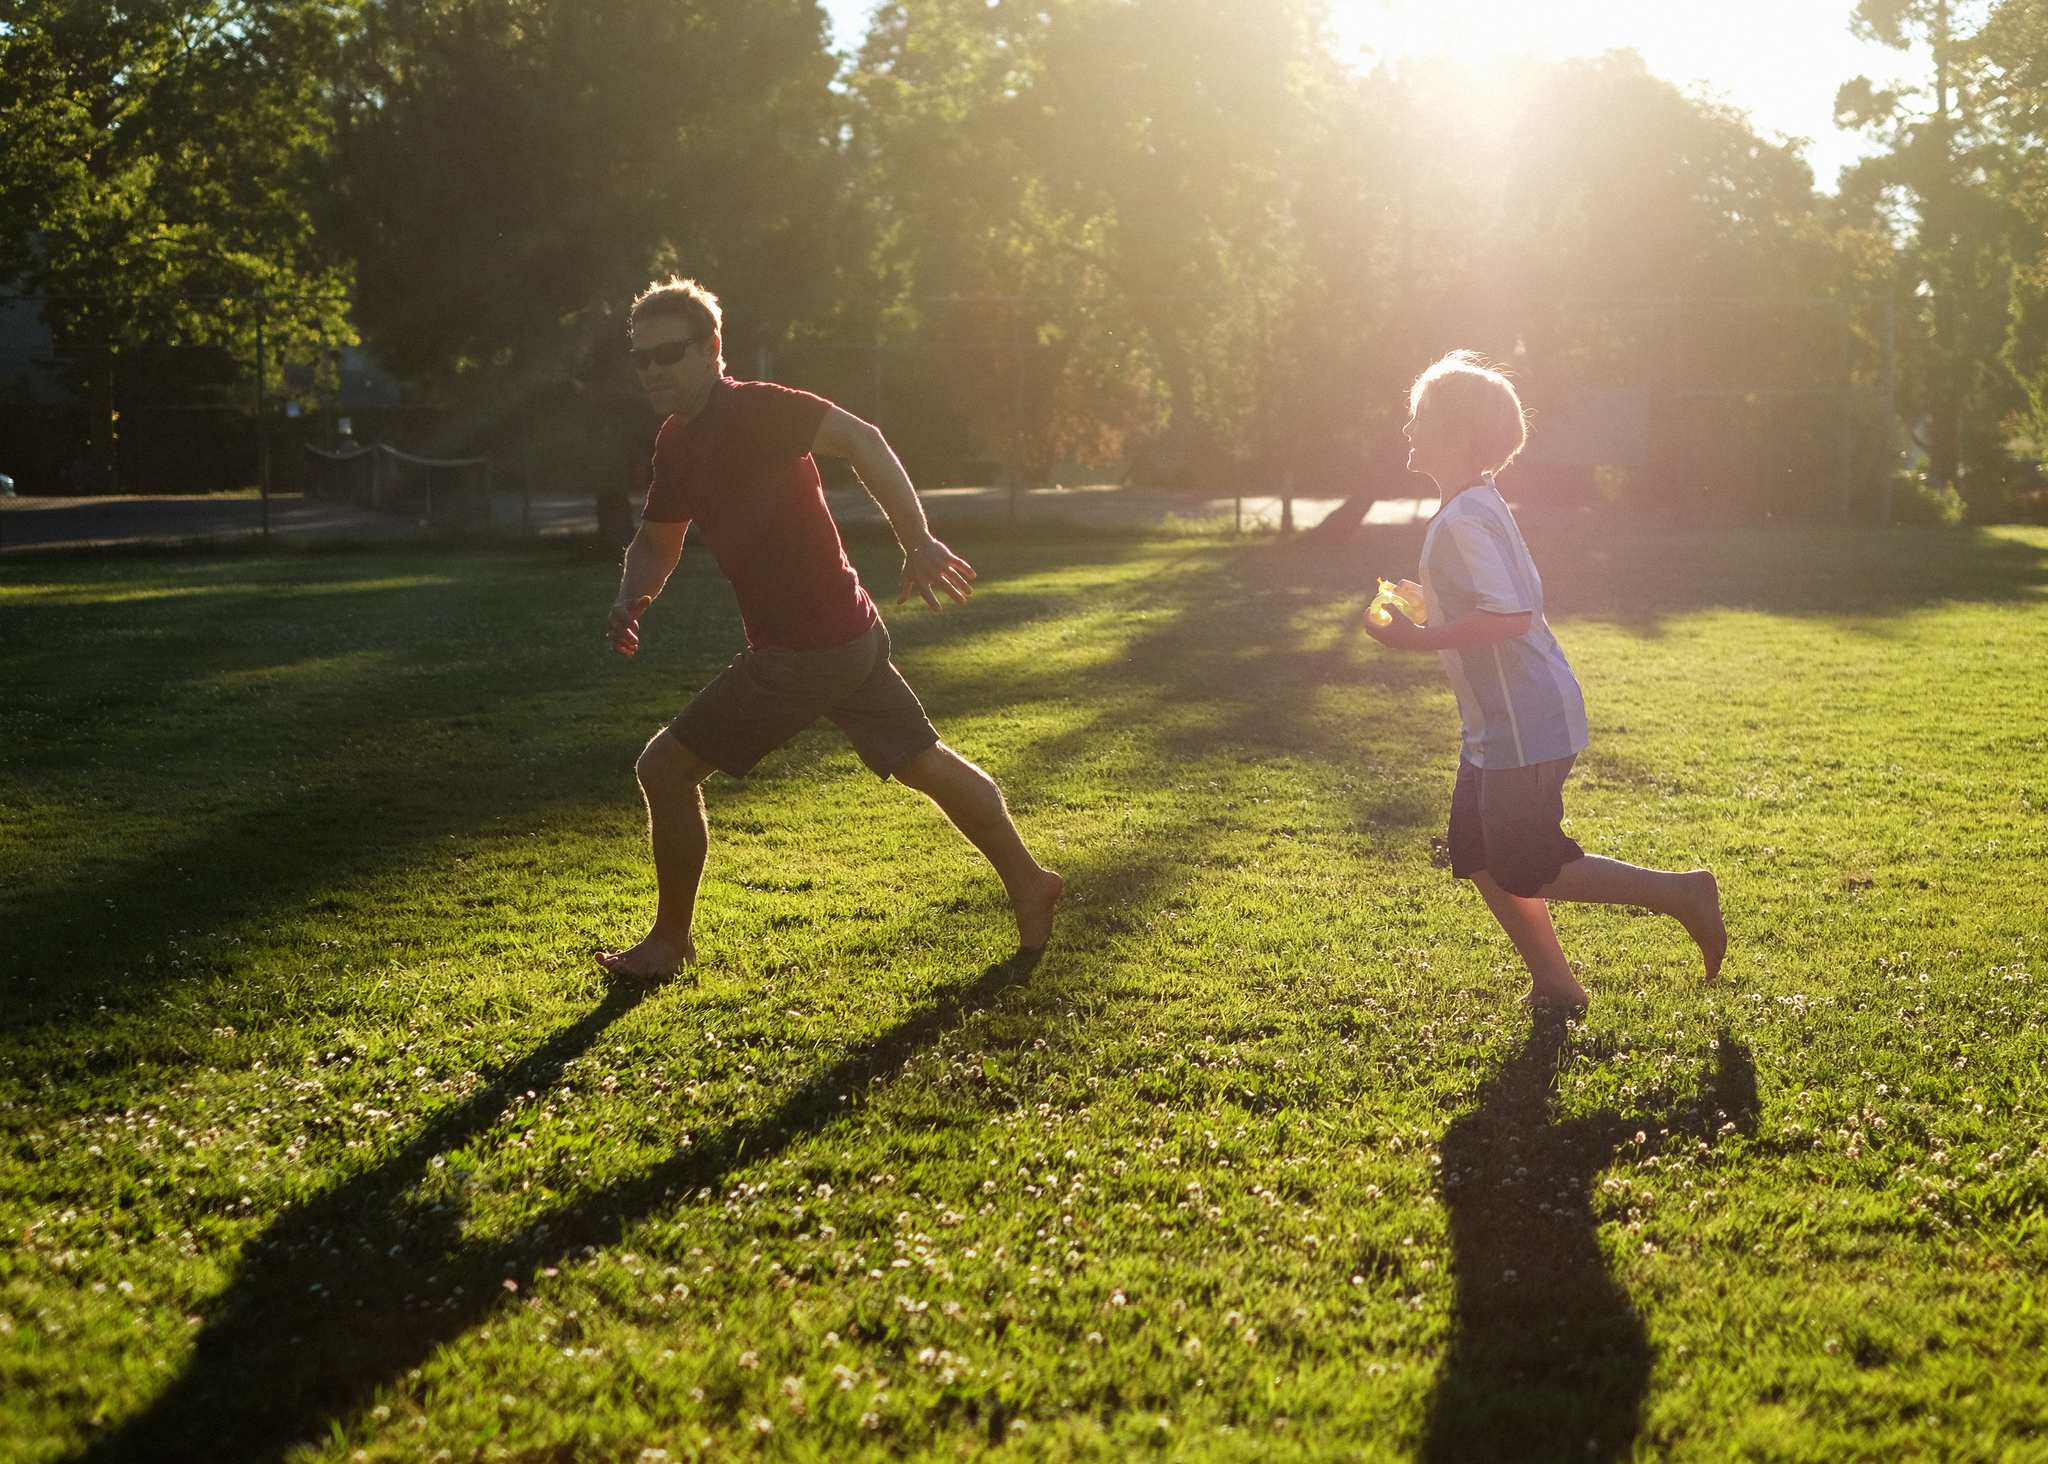 A man and a child are shown chasing their shadows outside in this example of tag games.